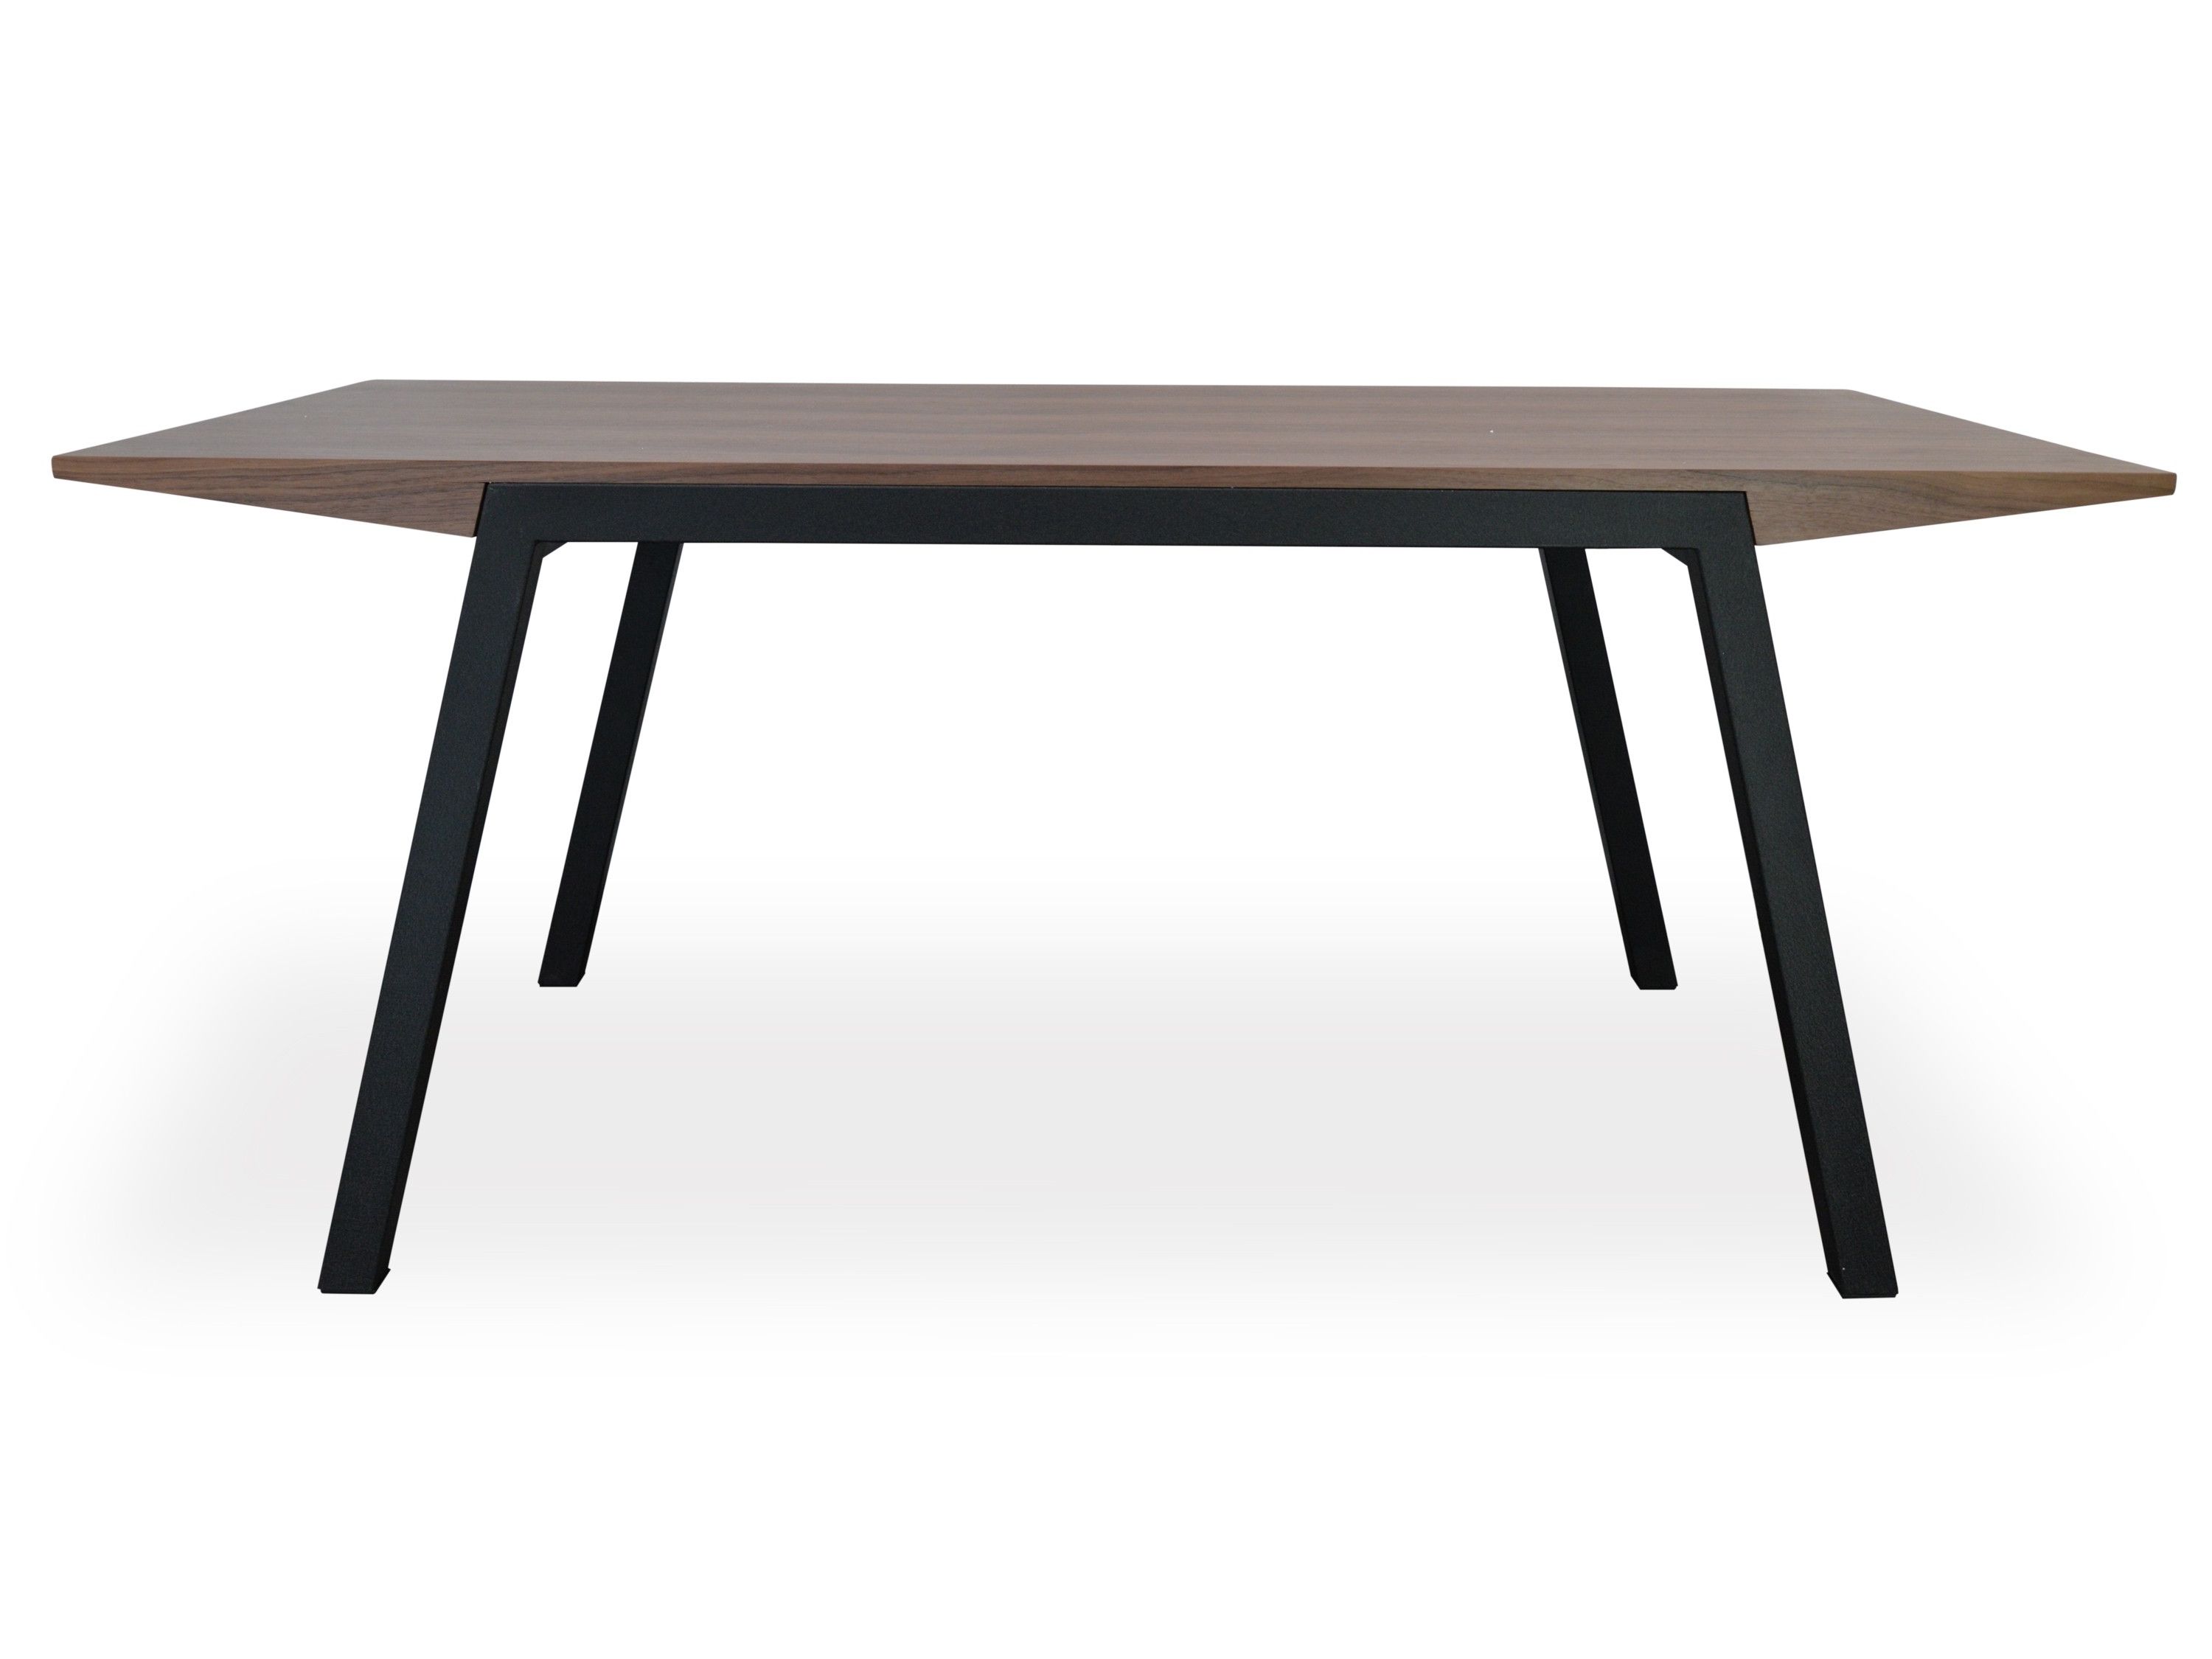 Most Recently Released Dinex Alfa Extension Dining Table New Jaxon Extension Rectangle With Regard To Jaxon Round Extension Dining Tables (View 13 of 25)